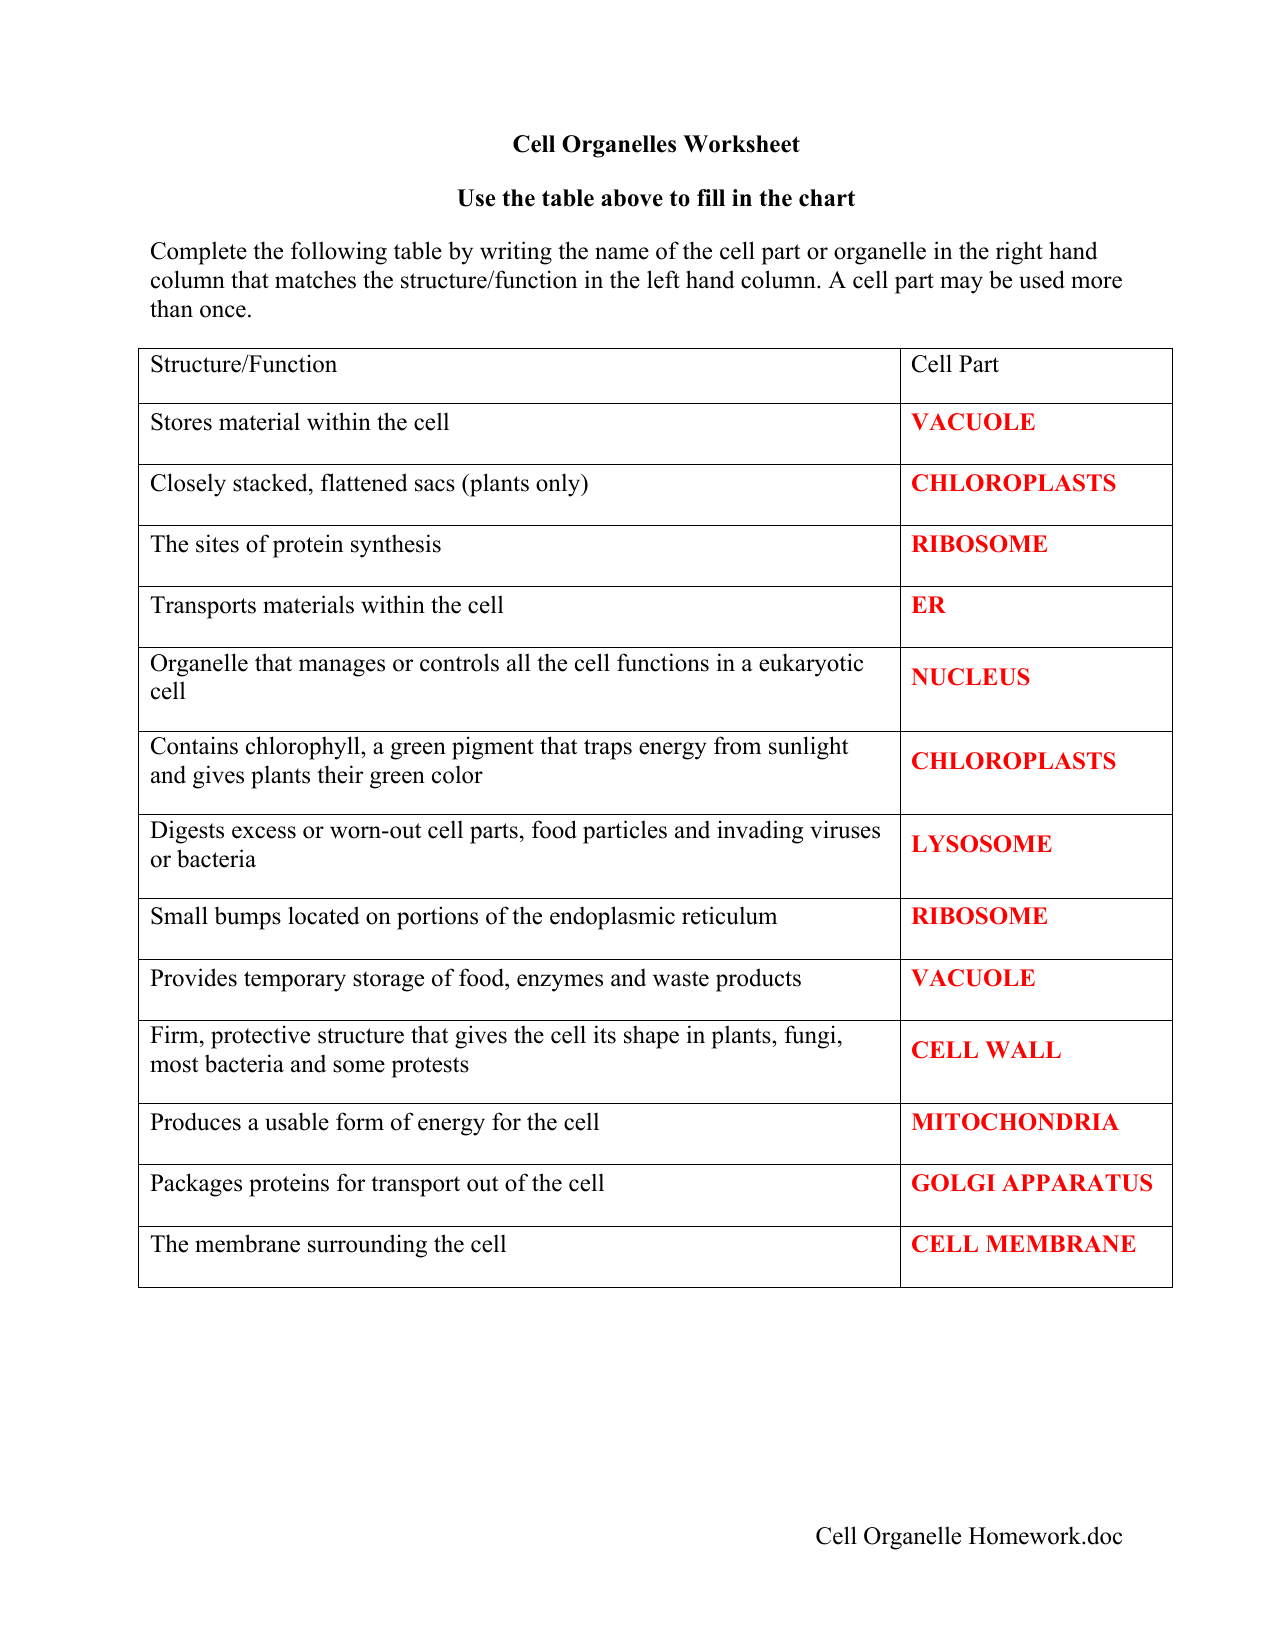 Cell Organelle Homework.doc Cell Organelles Worksheet Pertaining To Cells And Organelles Worksheet